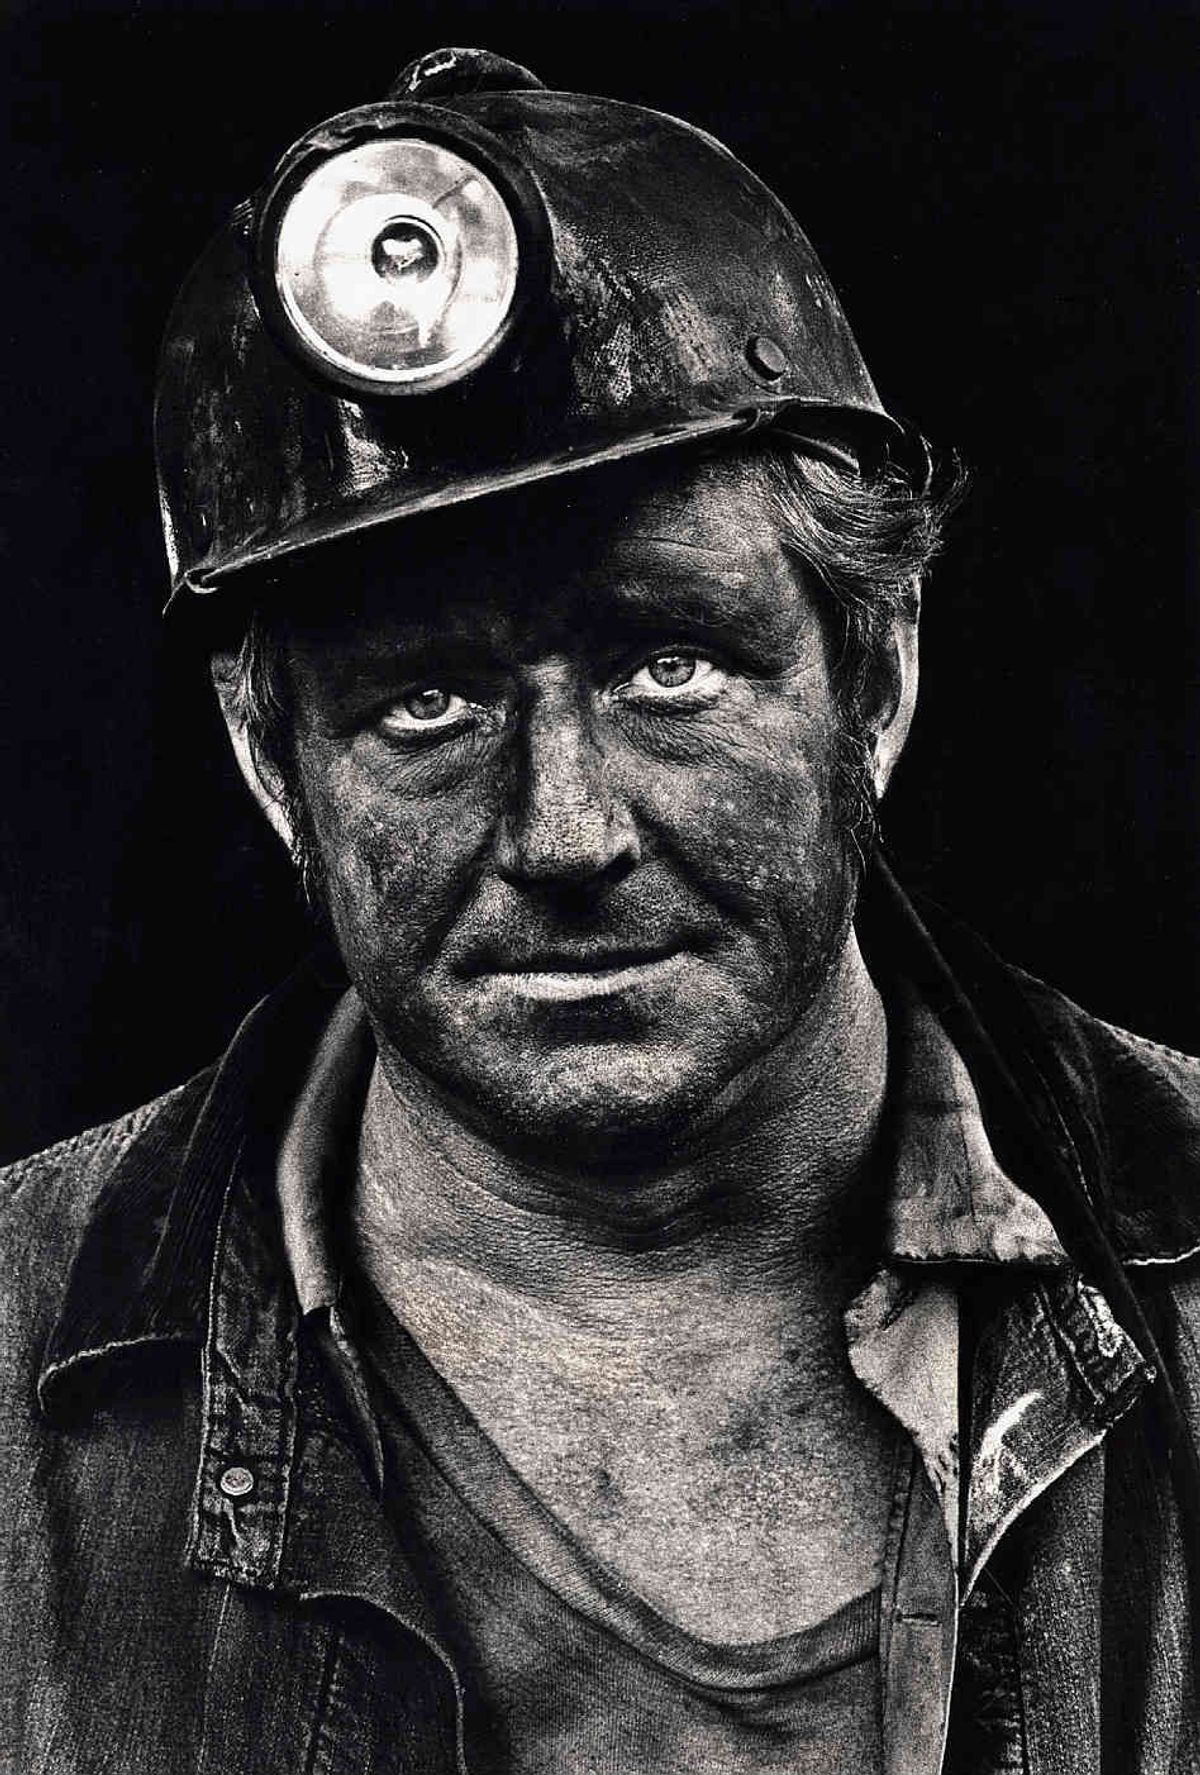 How The Downfall Of Coal Has Ruined Lives